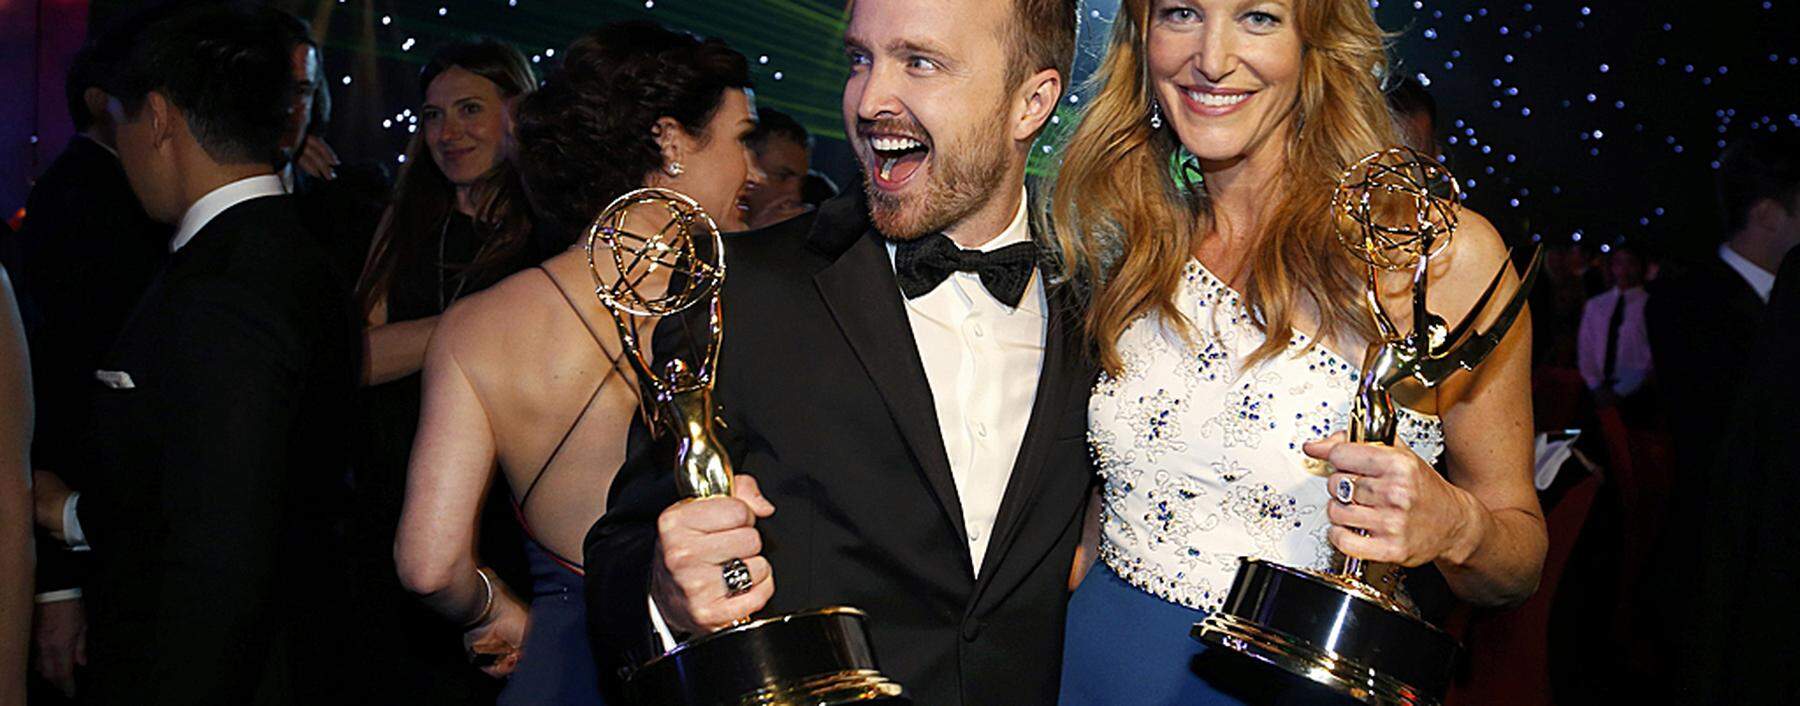 Aaron Paul with his Outstanding Supporting Actor in a Drama Series award and Anna Gunn with her Outstanding Supporting Actress in a Drama Series award attend the Governors Ball for the 66th Primetime Emmy Awards in Los Angeles